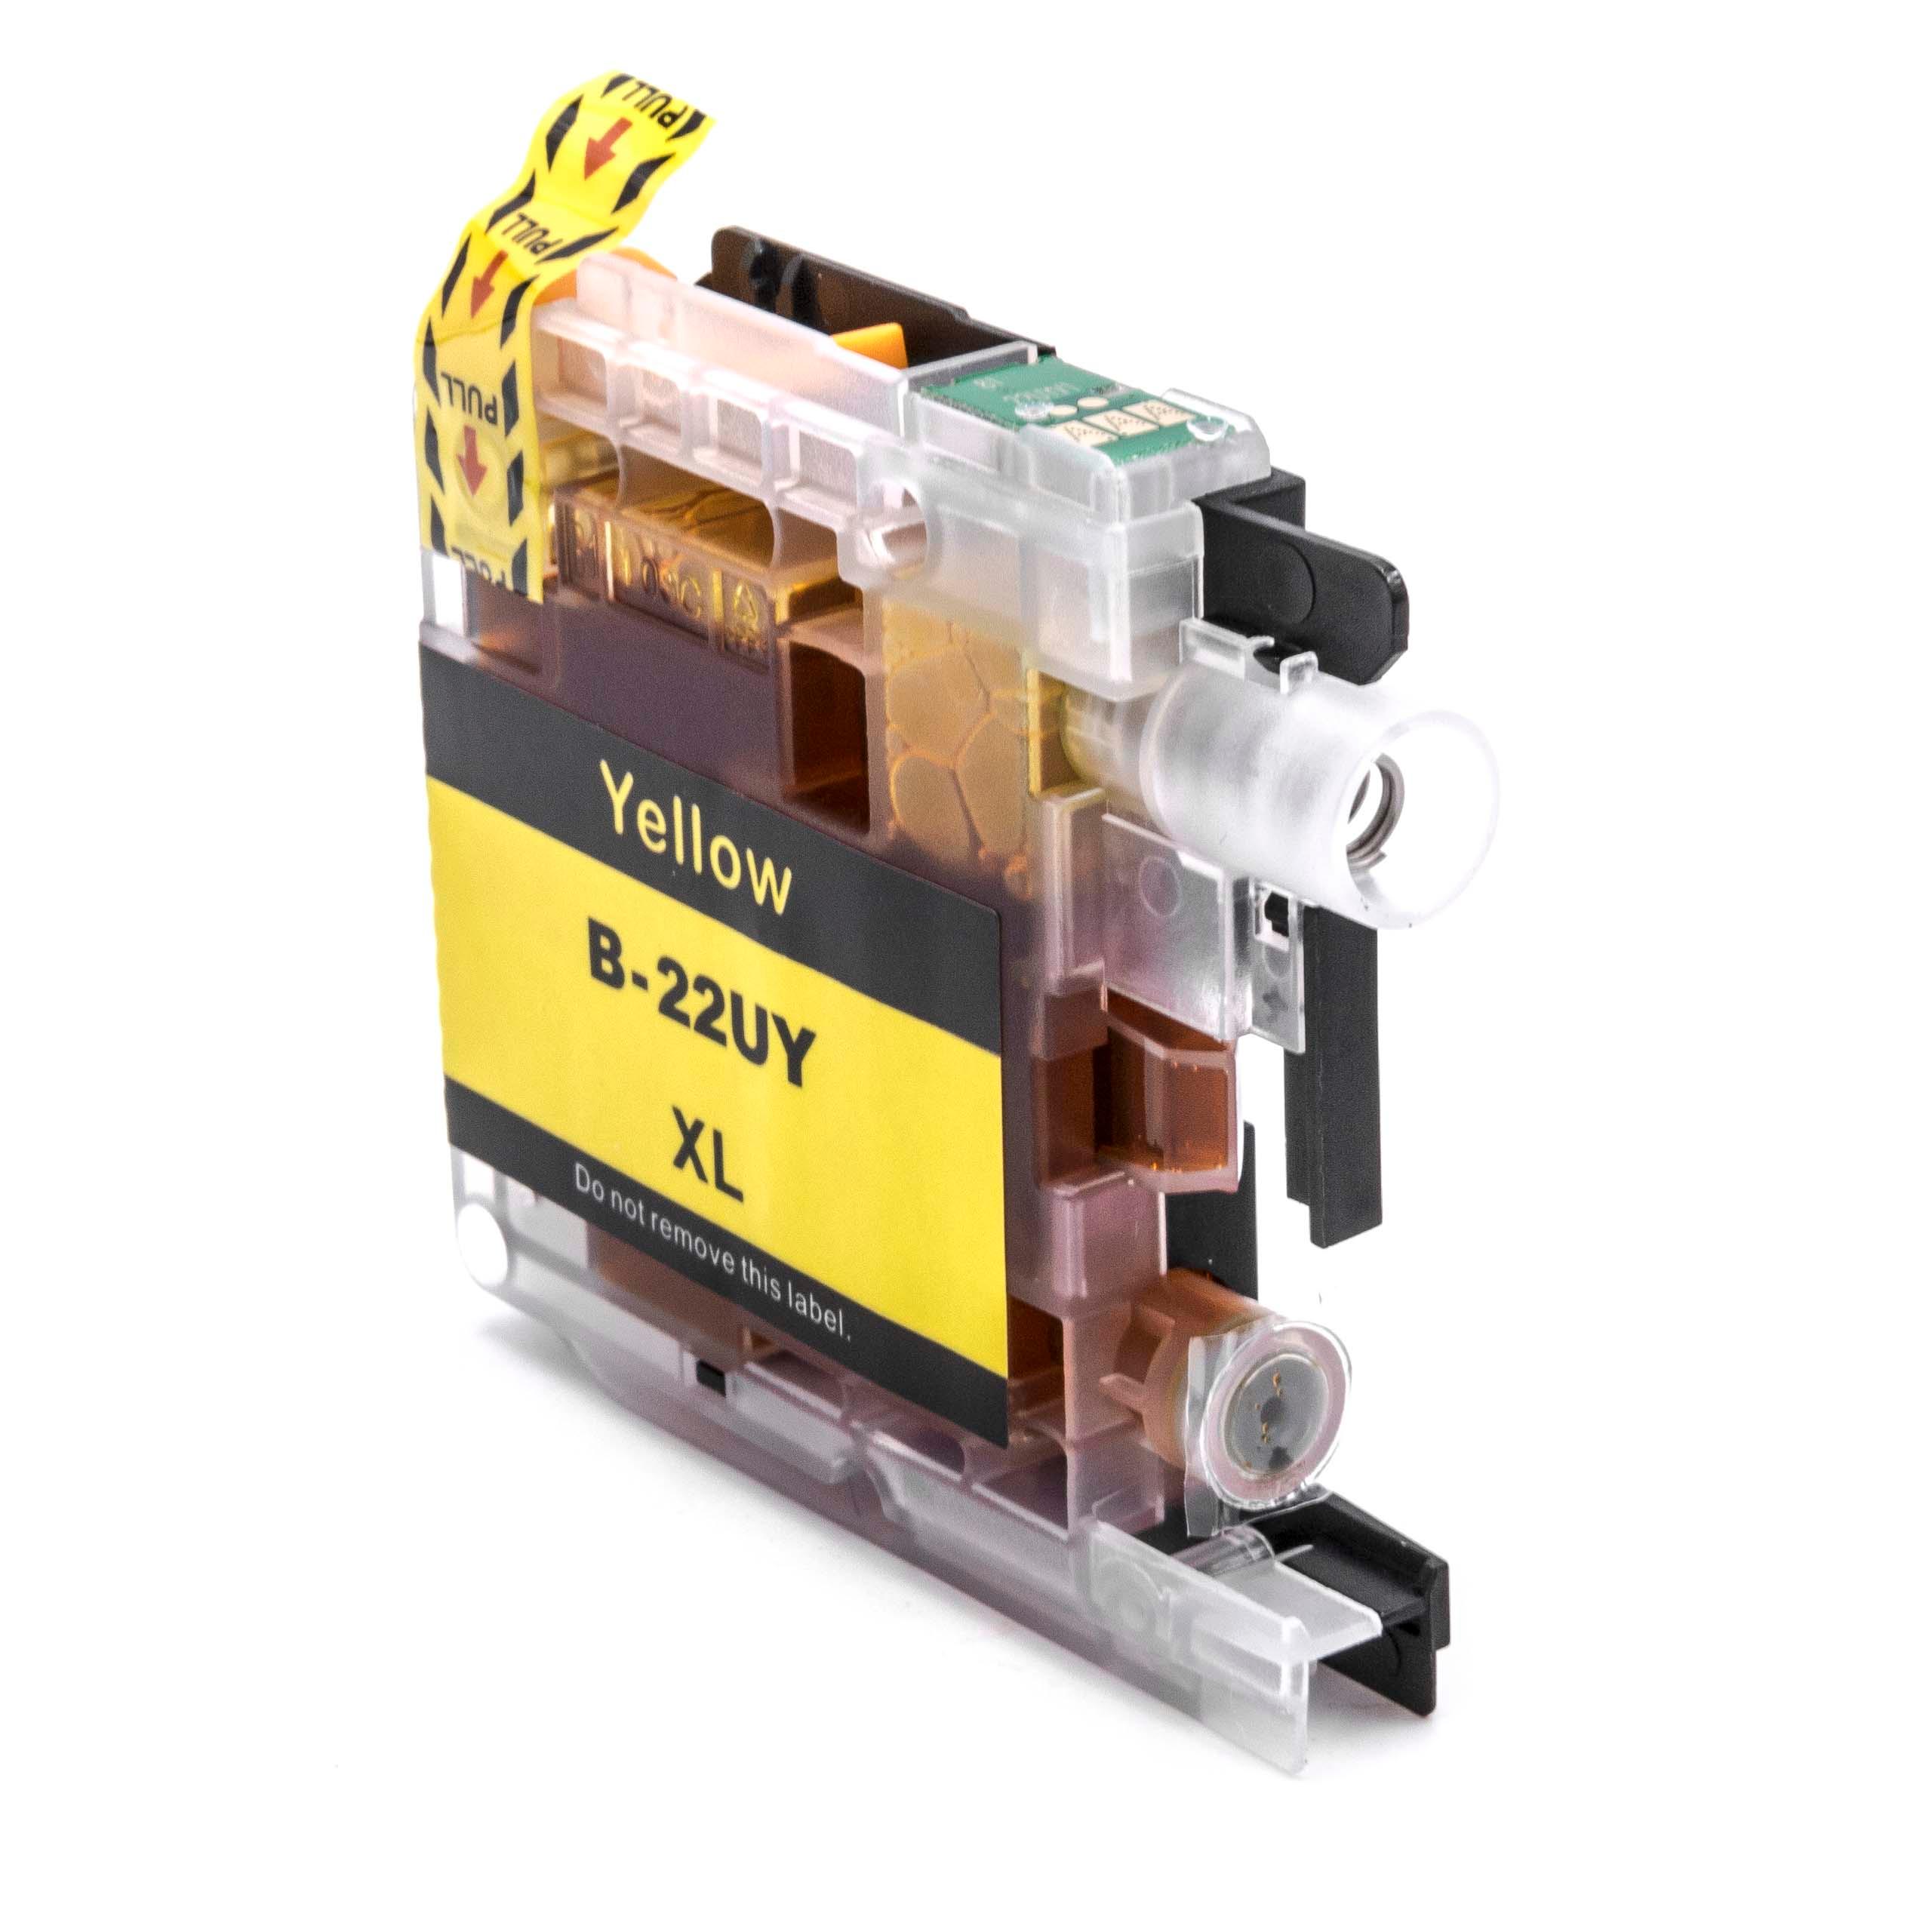 Ink Cartridge as Exchange for Brother LC-22U Y, LC-22UY, LC22UY for Brother Printer - Yellow 15 ml + Chip